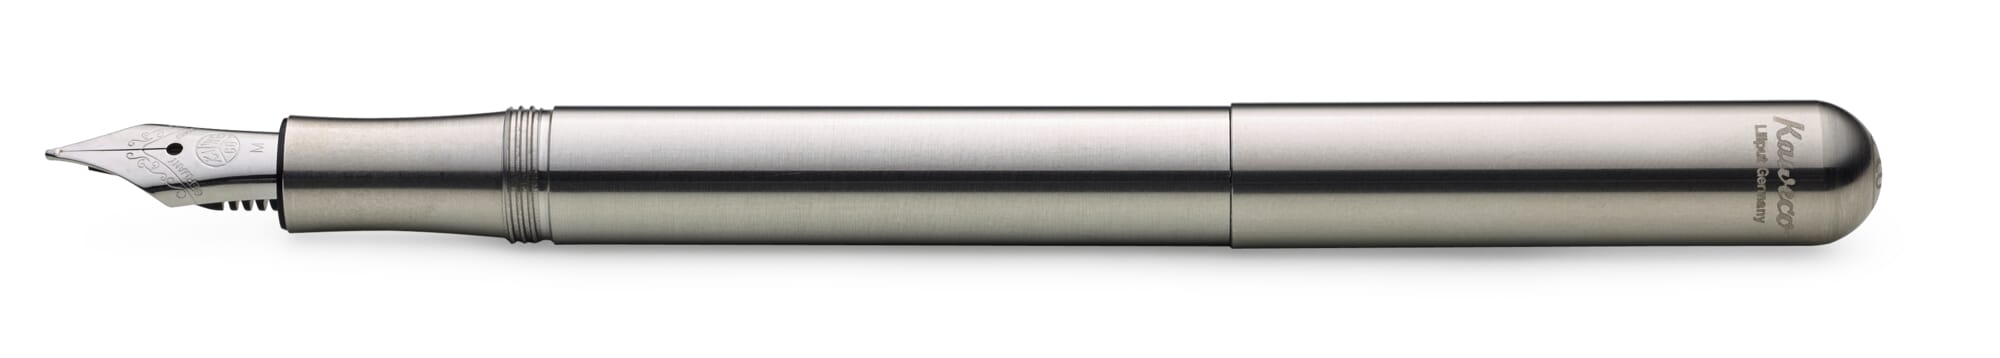 Kaweco Liliput fountain pen stainless steel, Stainless steel, F